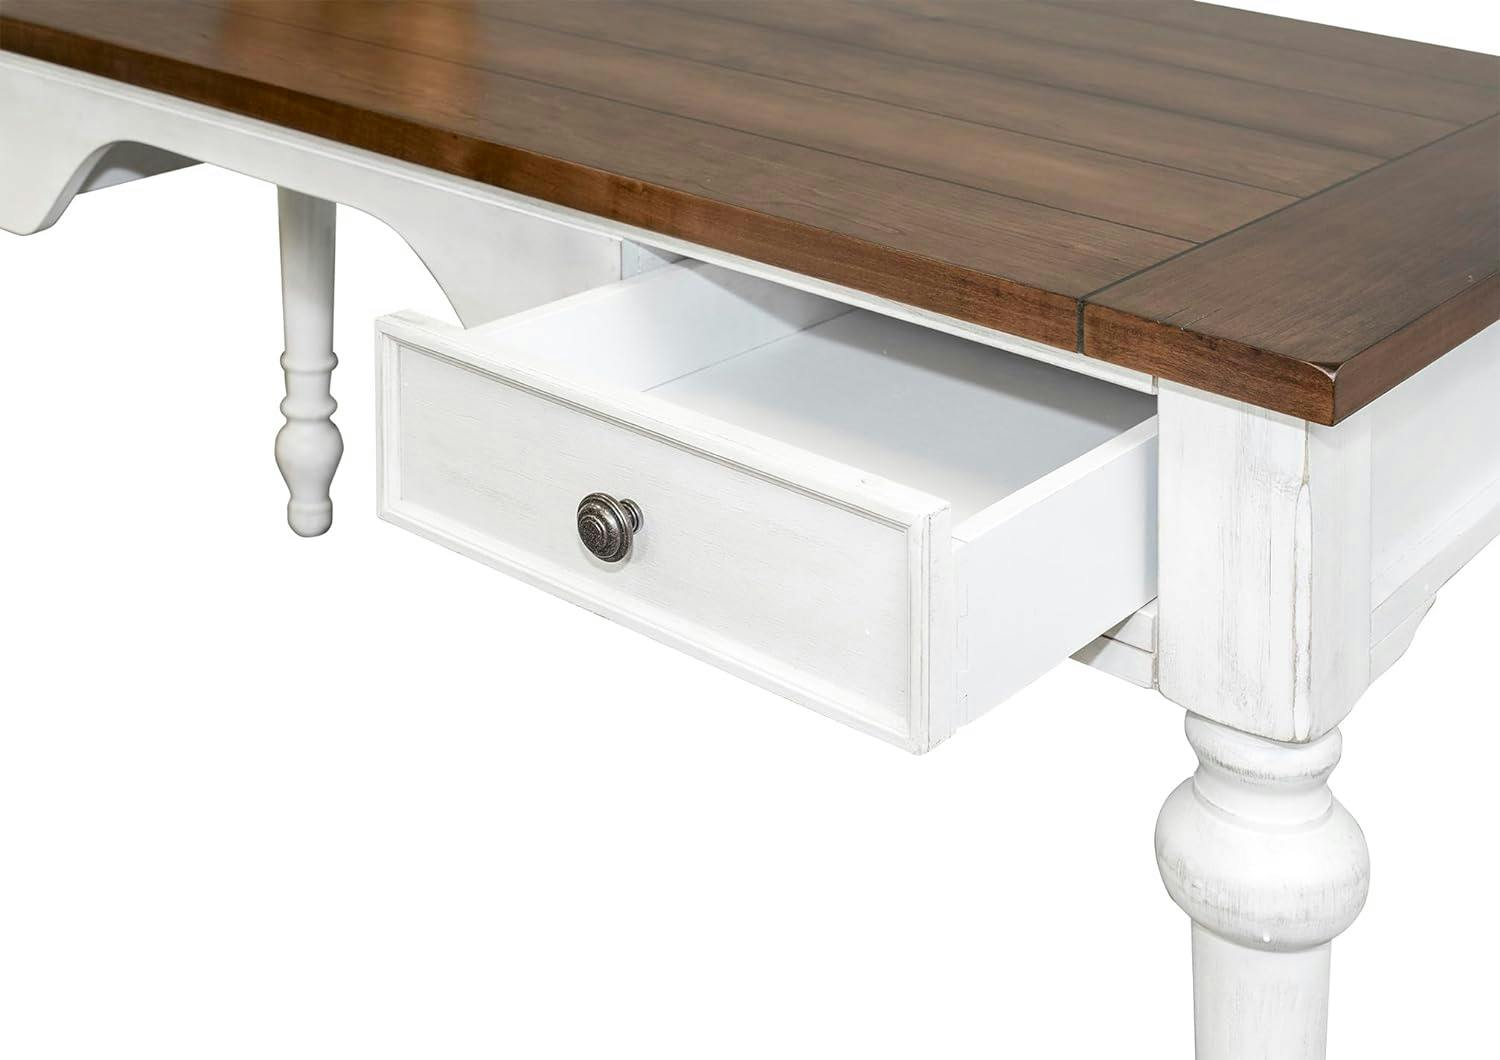 Durham 60'' Traditional White and Cherry Home Office Desk with Drawers